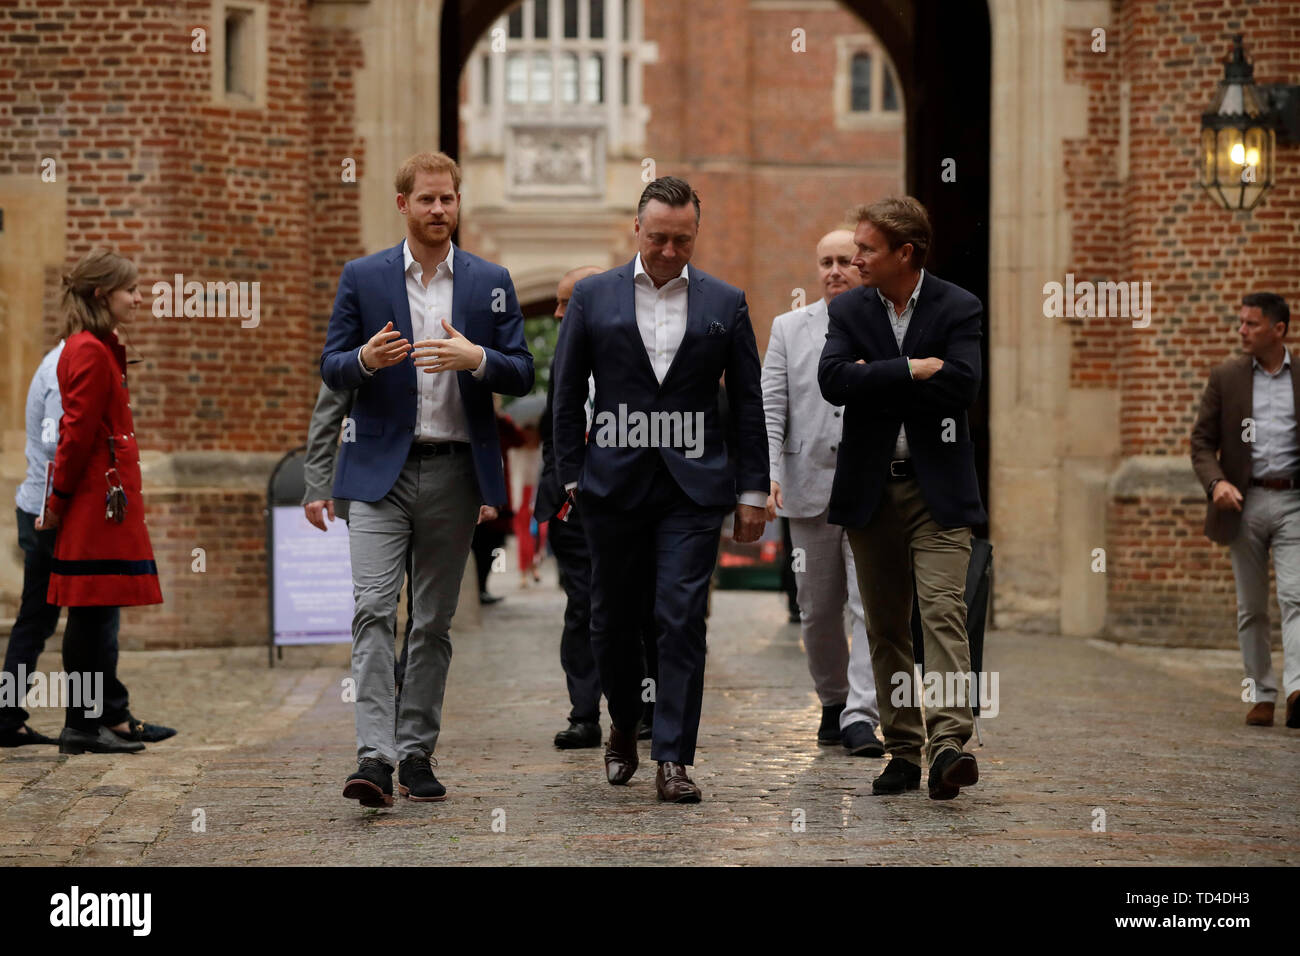 The Duke of Sussex walks with the Managing Director of Audi UK Andrew Doyle (centre) and the Chairman of Sentebale Johnny Hornby before a concert hosted by Sentebale in Hampton Court Palace in East Molesey, to raise awareness and vital funds for the Duke's charity, Sentebale, which helps young people in southern Africa affected by HIV. Stock Photo